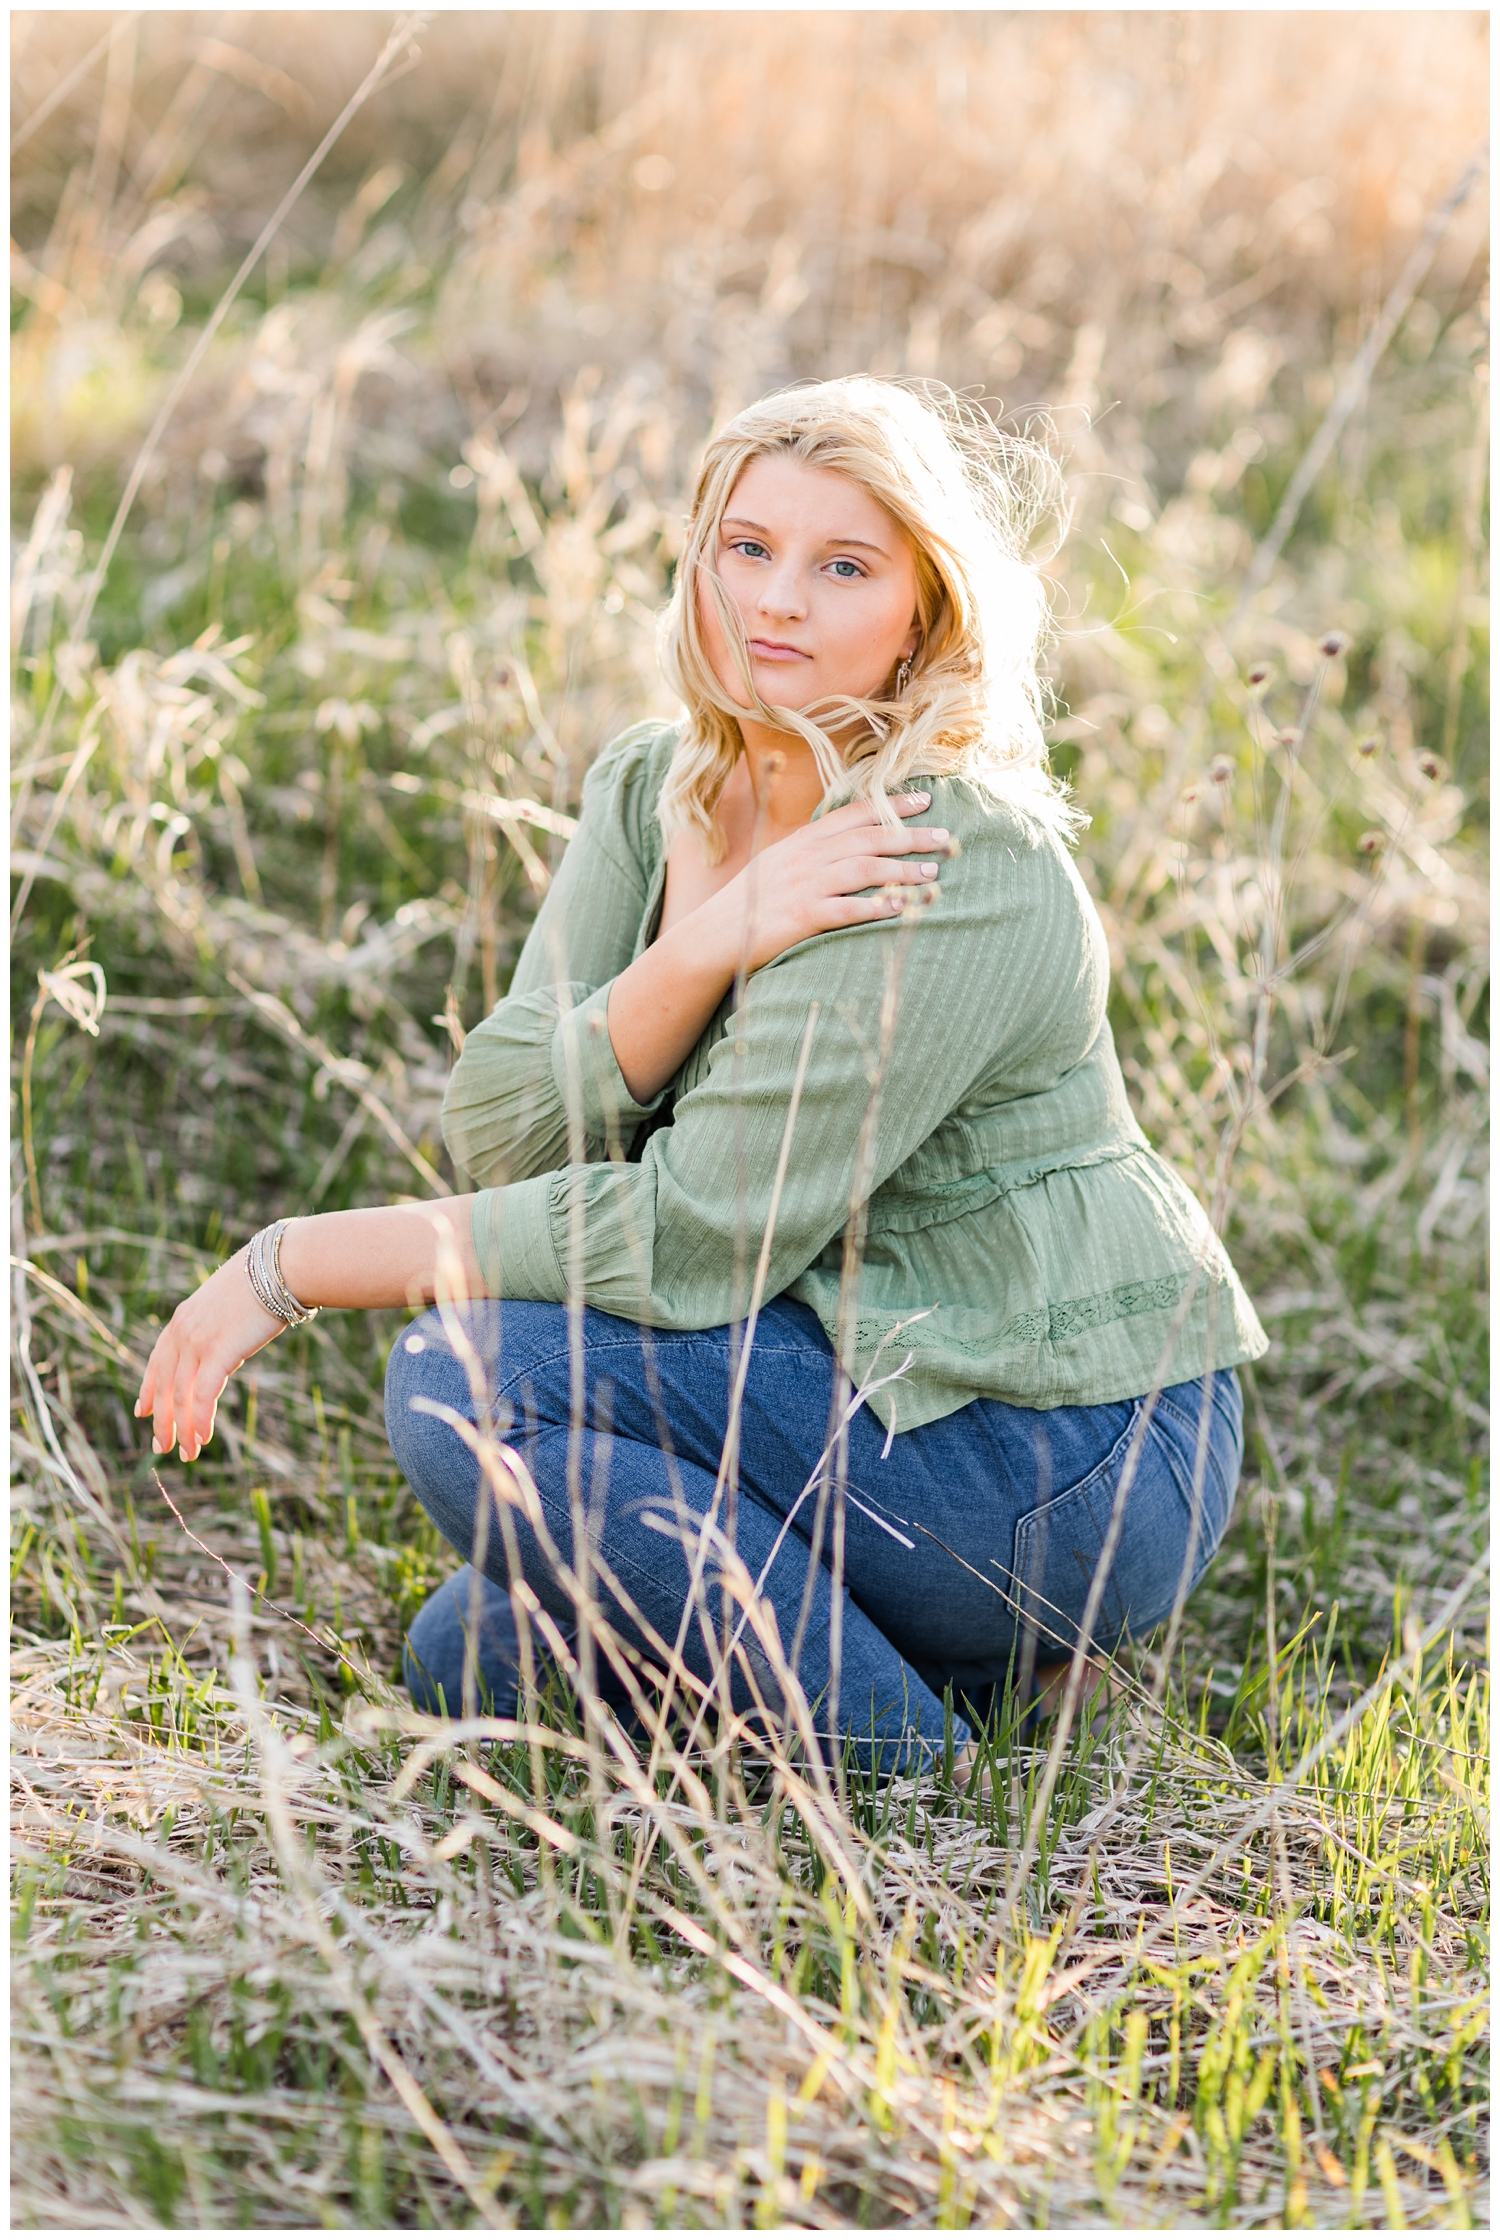 Abby sits in a grassy field during golden hour | CB Studio